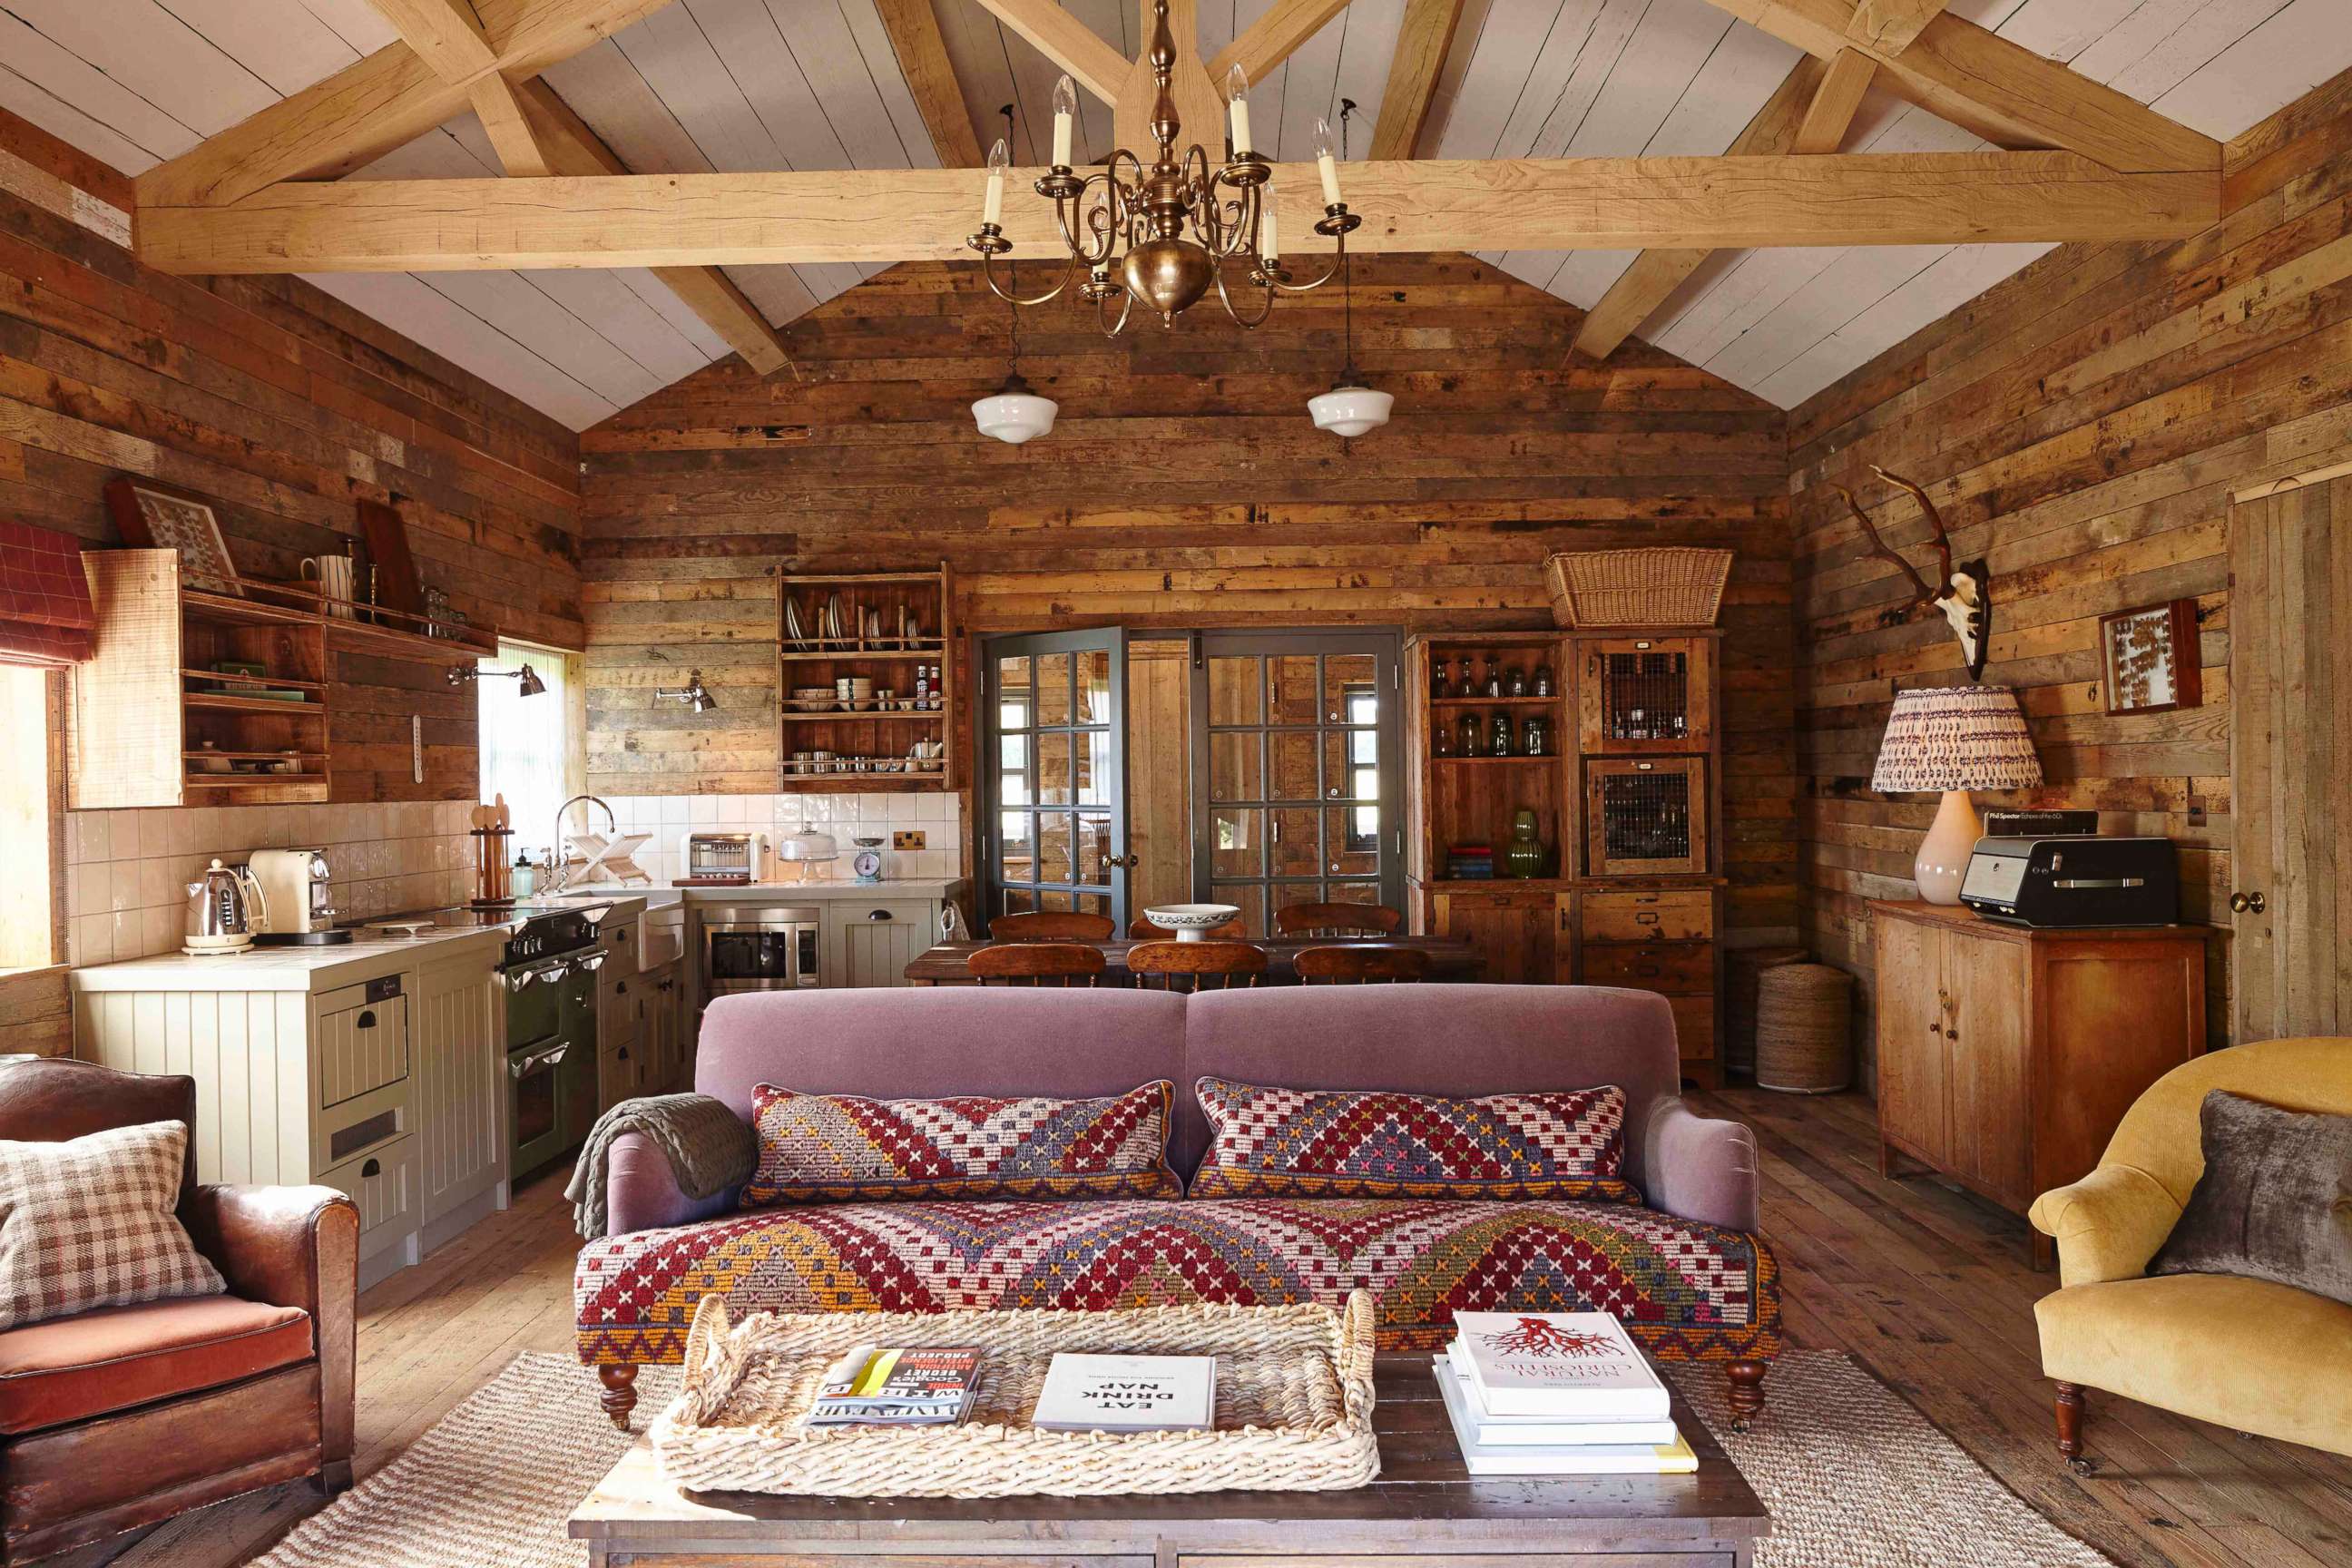 PHOTO: The interior of a cabin at Soho Farmhouse Oxfordshire is pictured here.